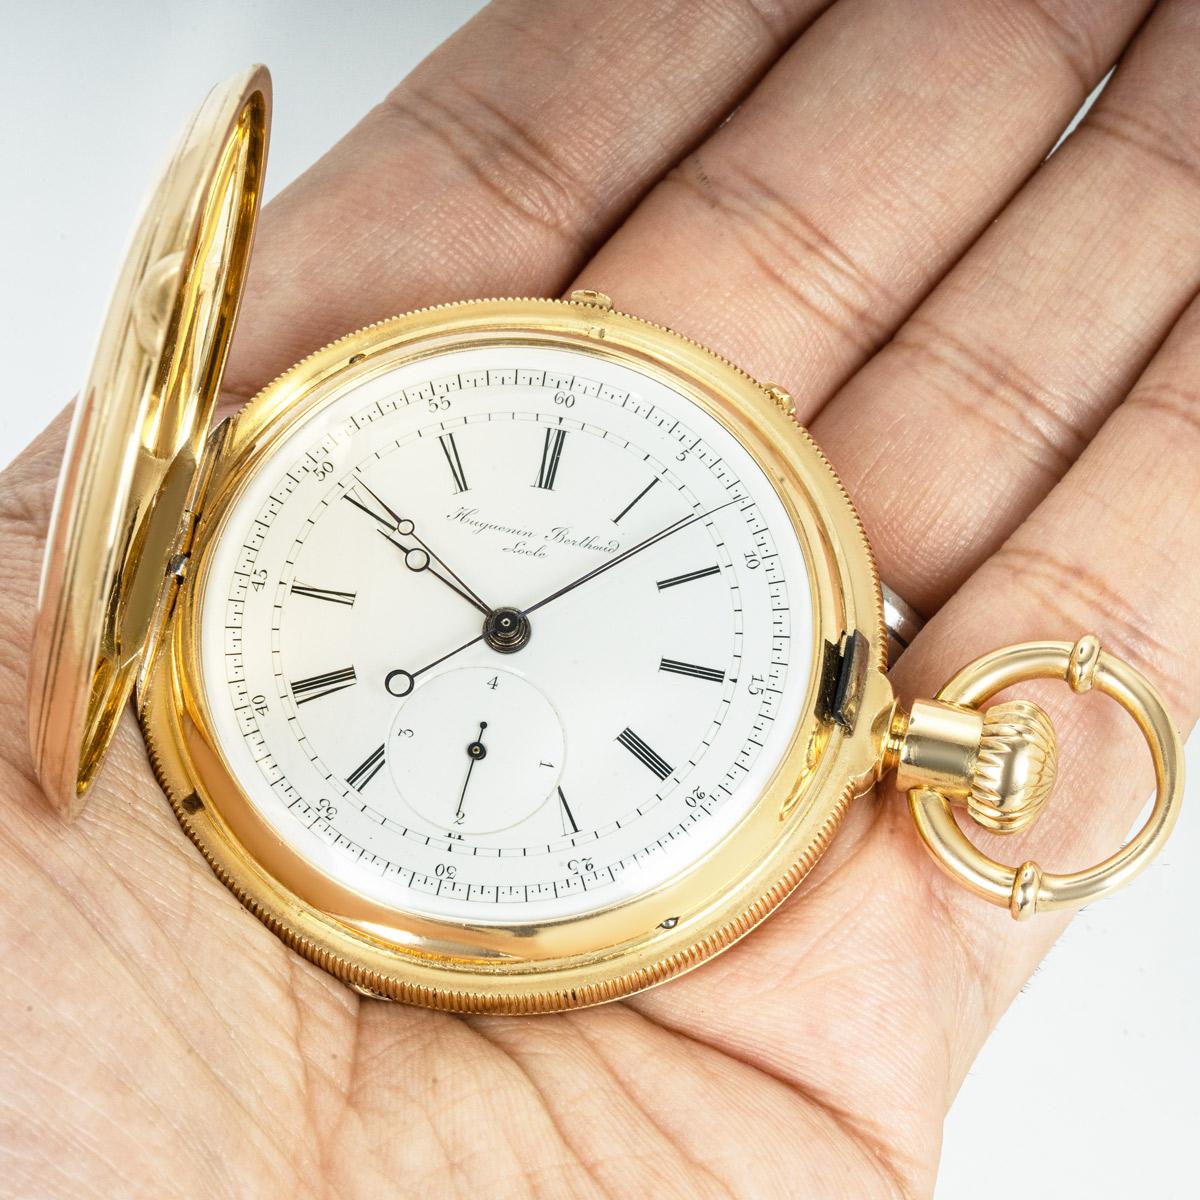 Huguenin Berthoud. A Rare Early Gold, Hunting Cased, Watch Chronograph C1860 For Sale 1